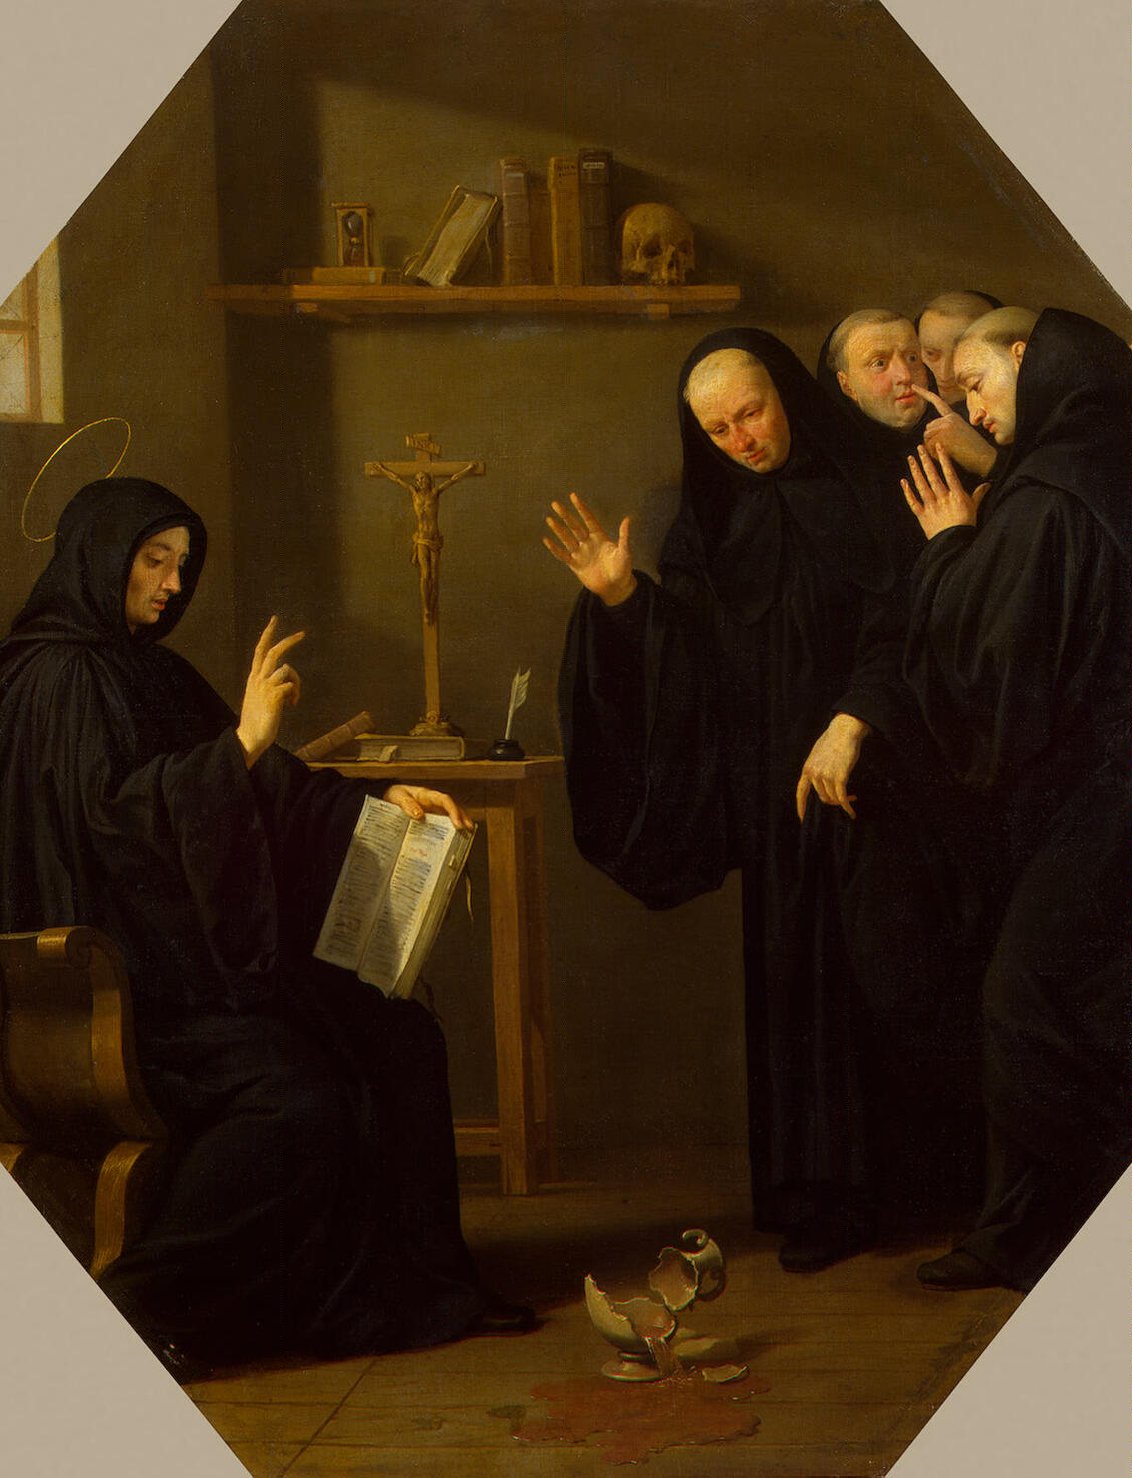 champaigne_philippe_dezzzscene_from_the_life_of_st_benedict-_the_poisoned_cup_of_wine